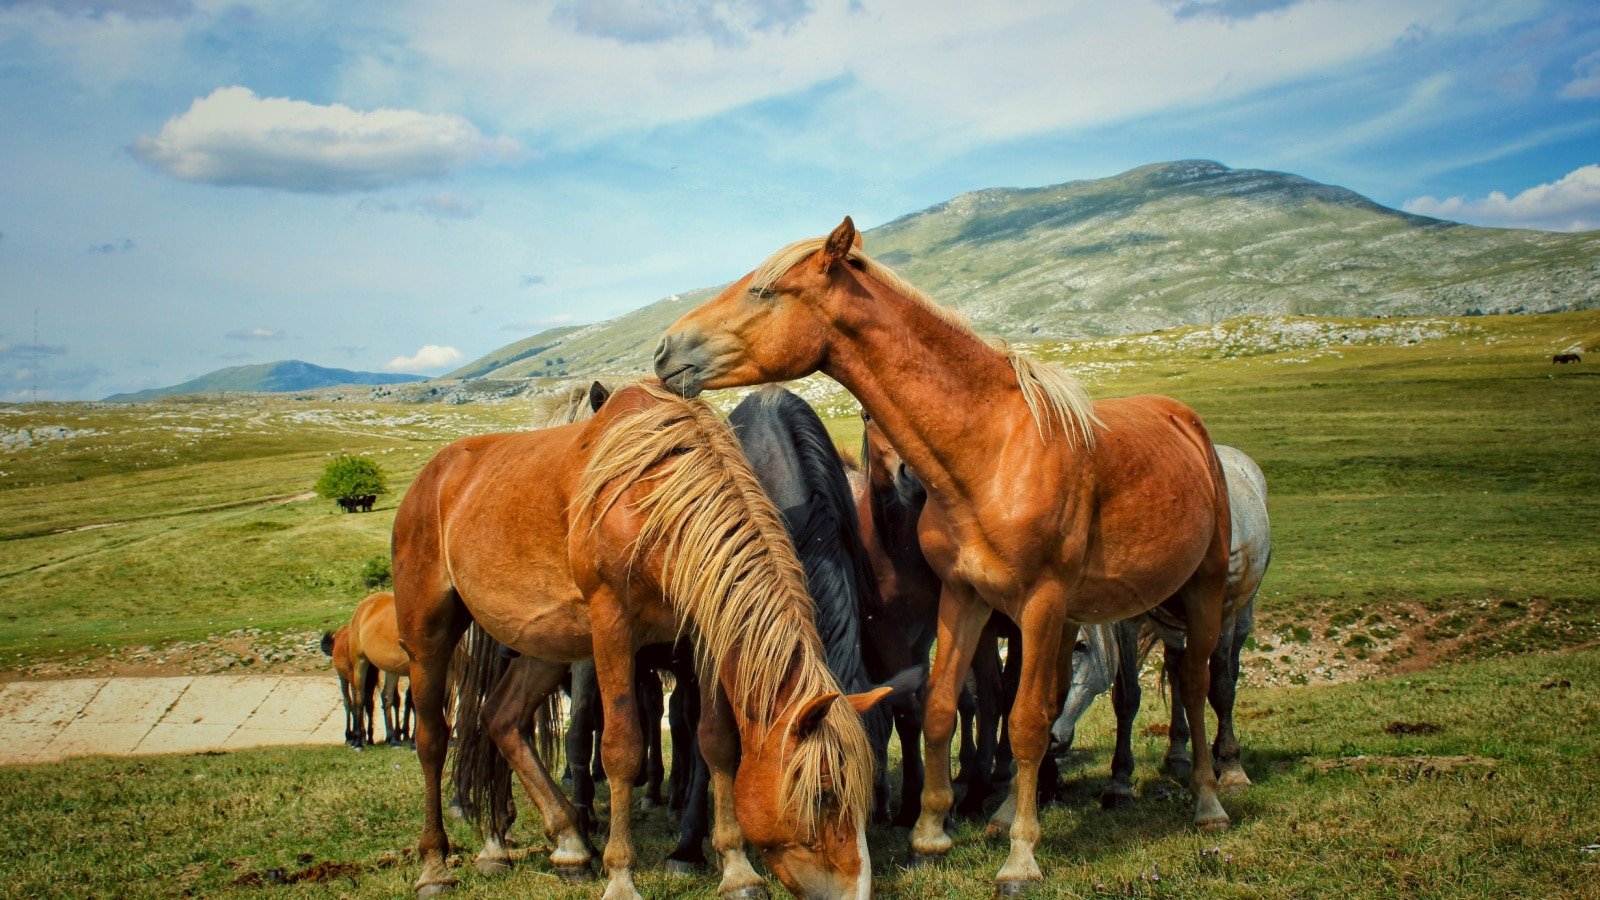 <p>Have you ever dreamt of running with wild horses? Livno is the place for you. A small town in Herzegovina, Livno is best known for the herds of wild horses that roam the nearby hills. Plenty of tour operators working in and around town focus on visiting the horses, throwing in a bit of Livno history and heritage along the way. If you love horses, you'll love Livno.</p>